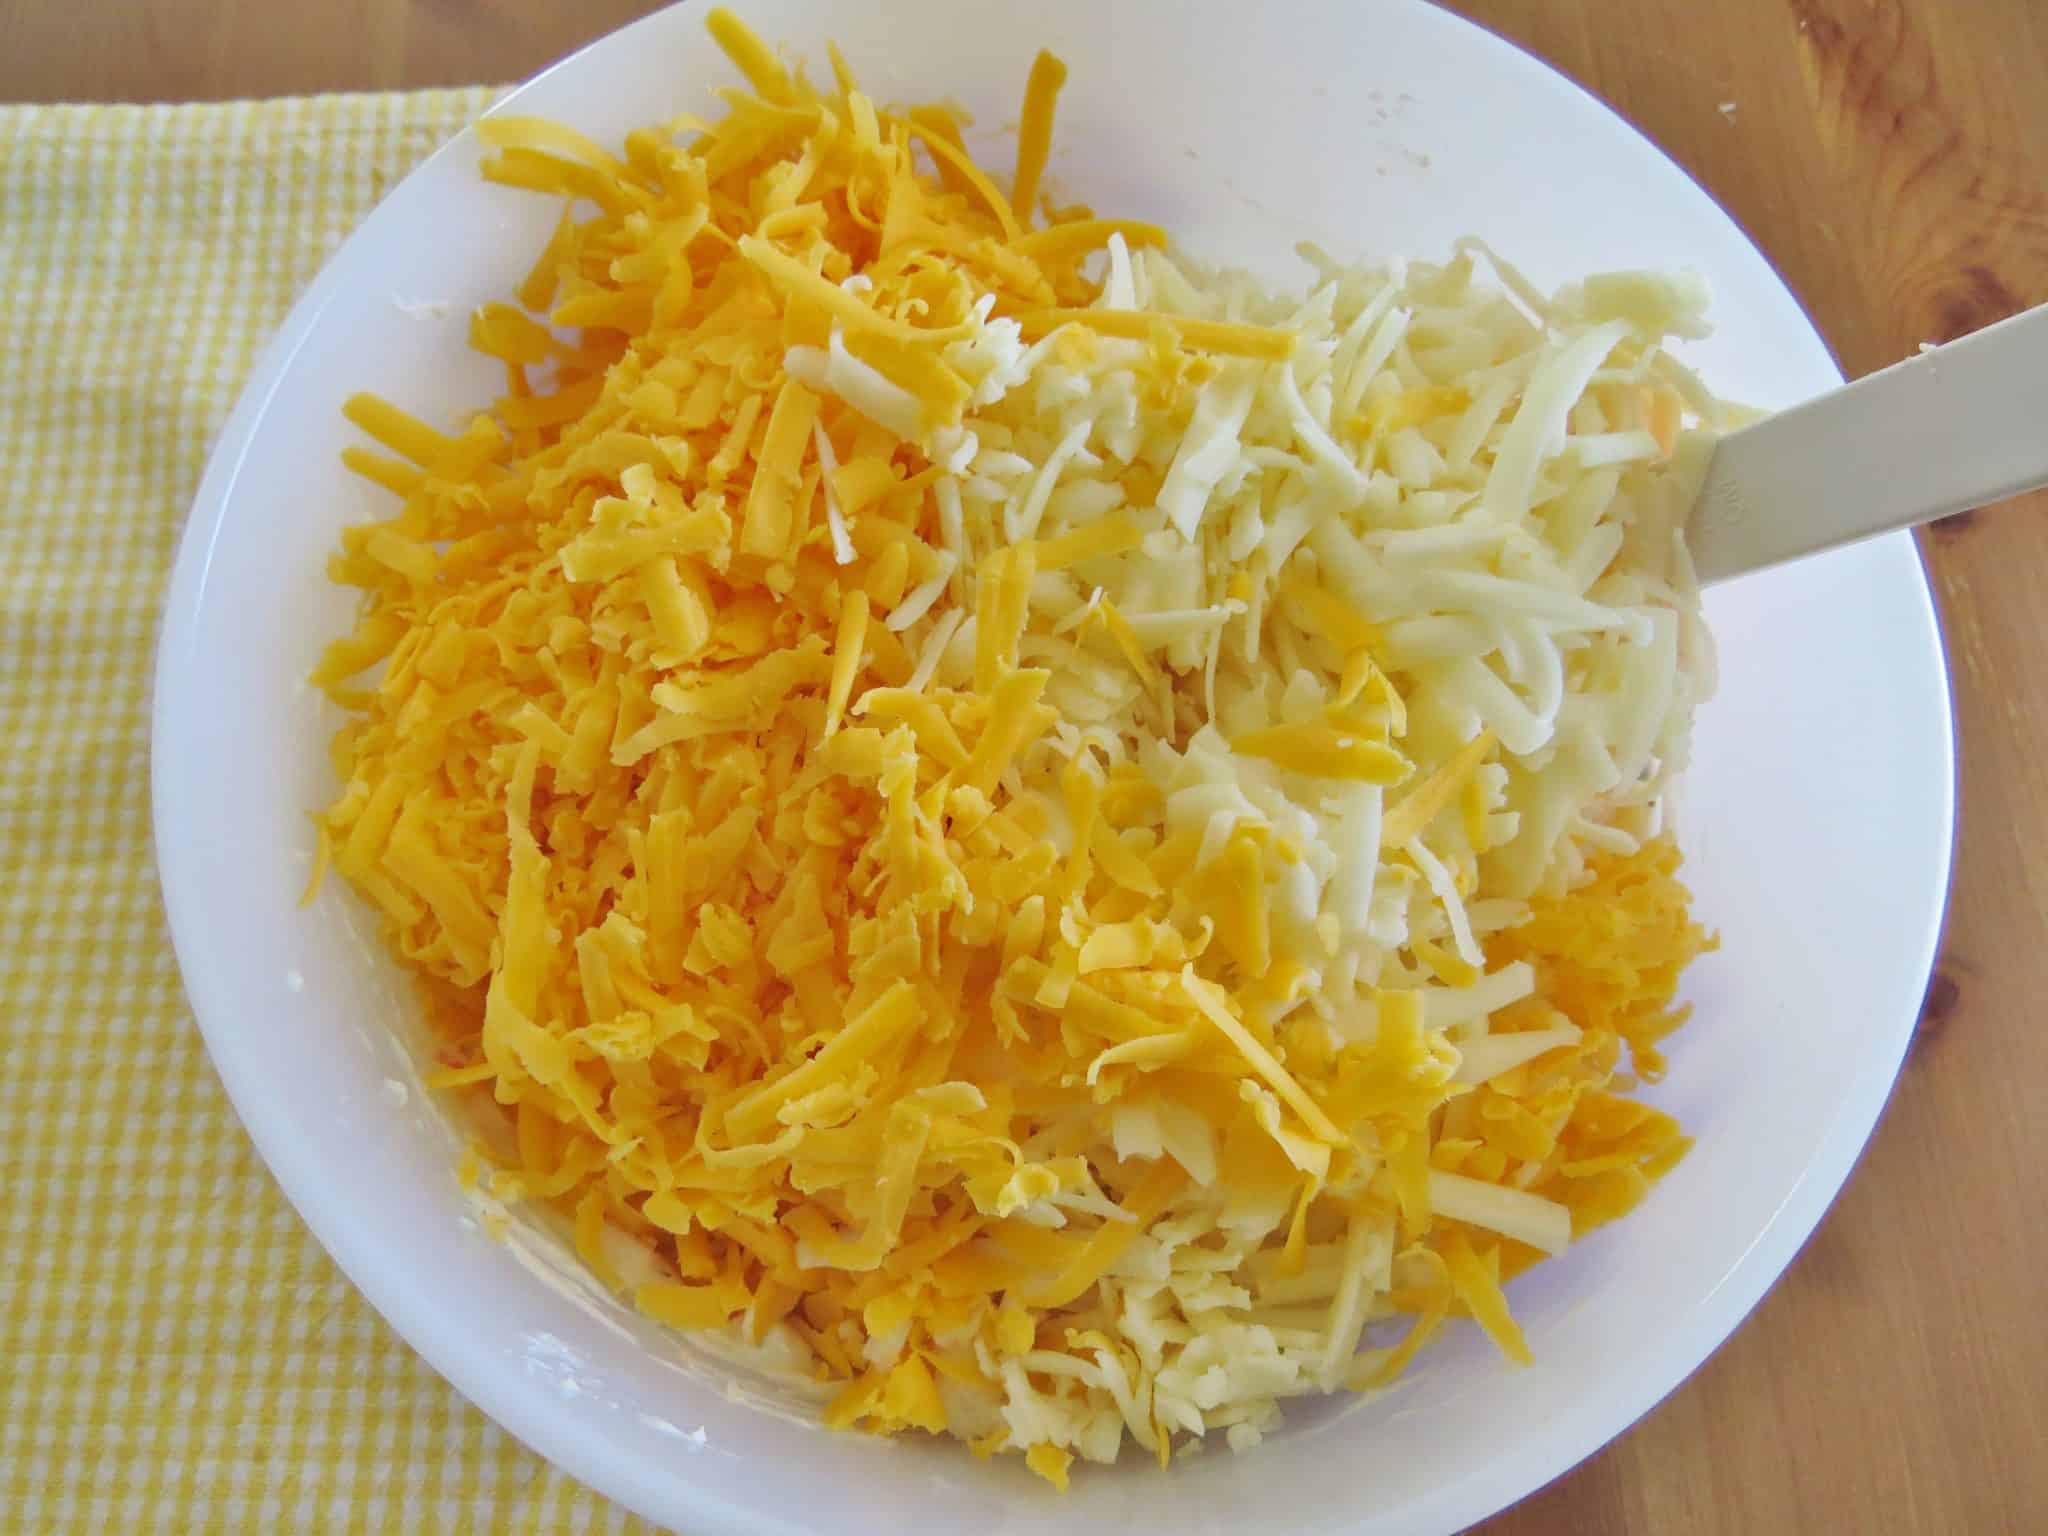 shredded cheddar cheeses added to seasoned cream cheese mixture in a large bowl.